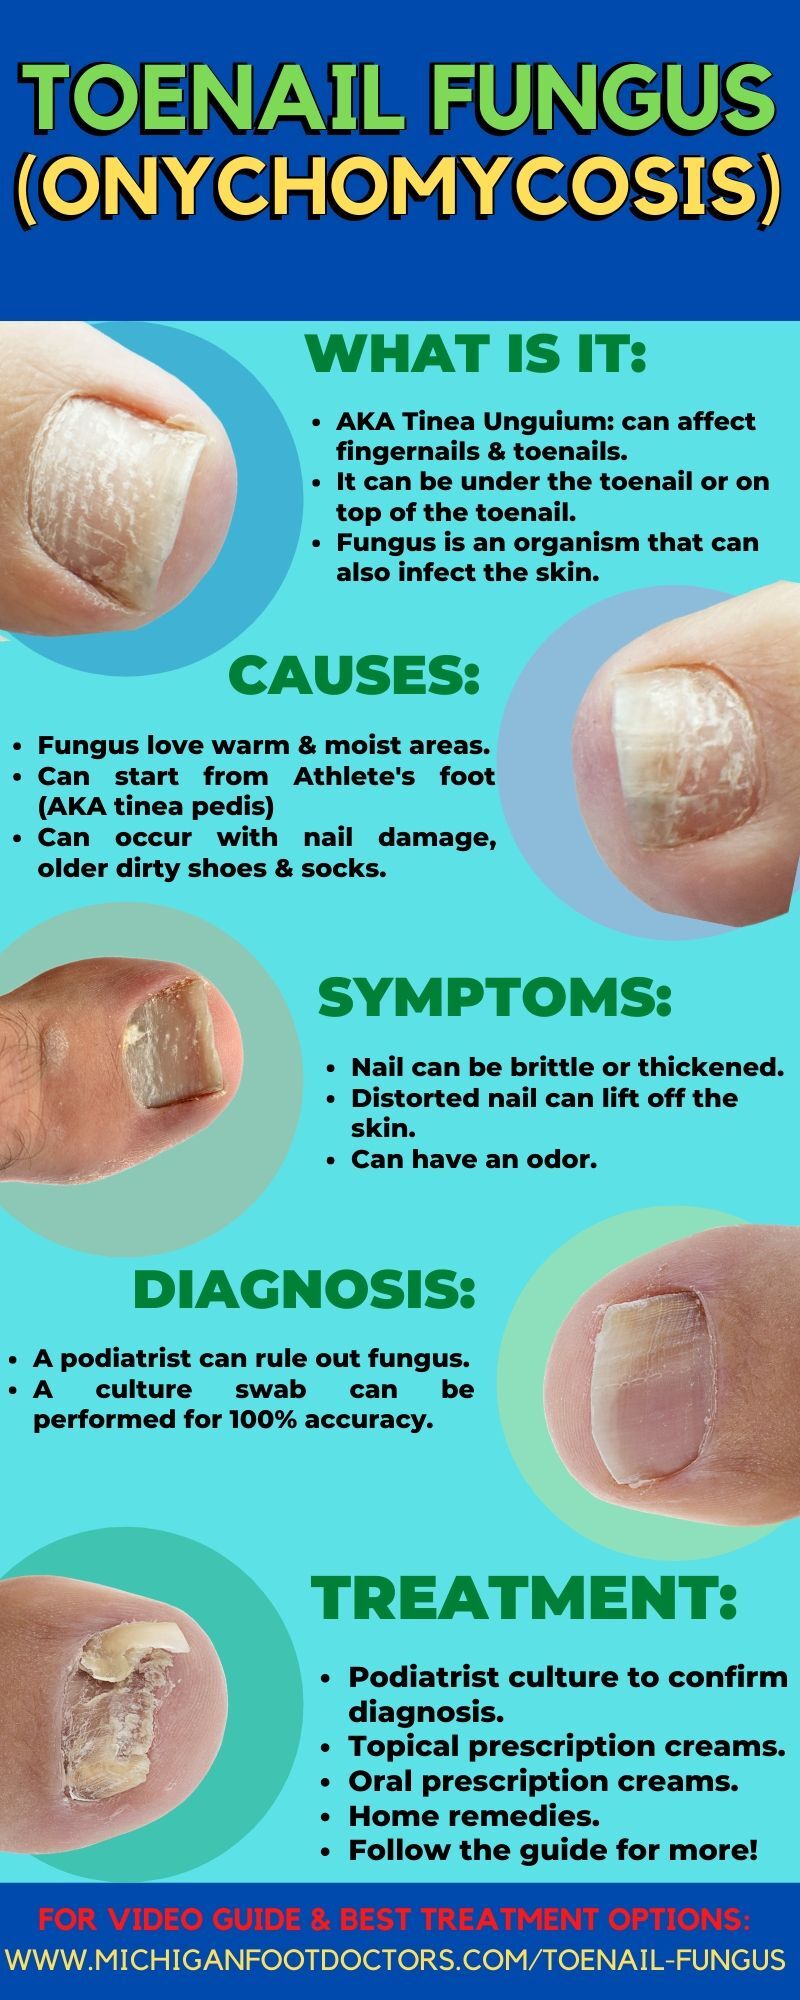 Laser Treatment for Toenail Fungus to combat onychomycosis at the root!